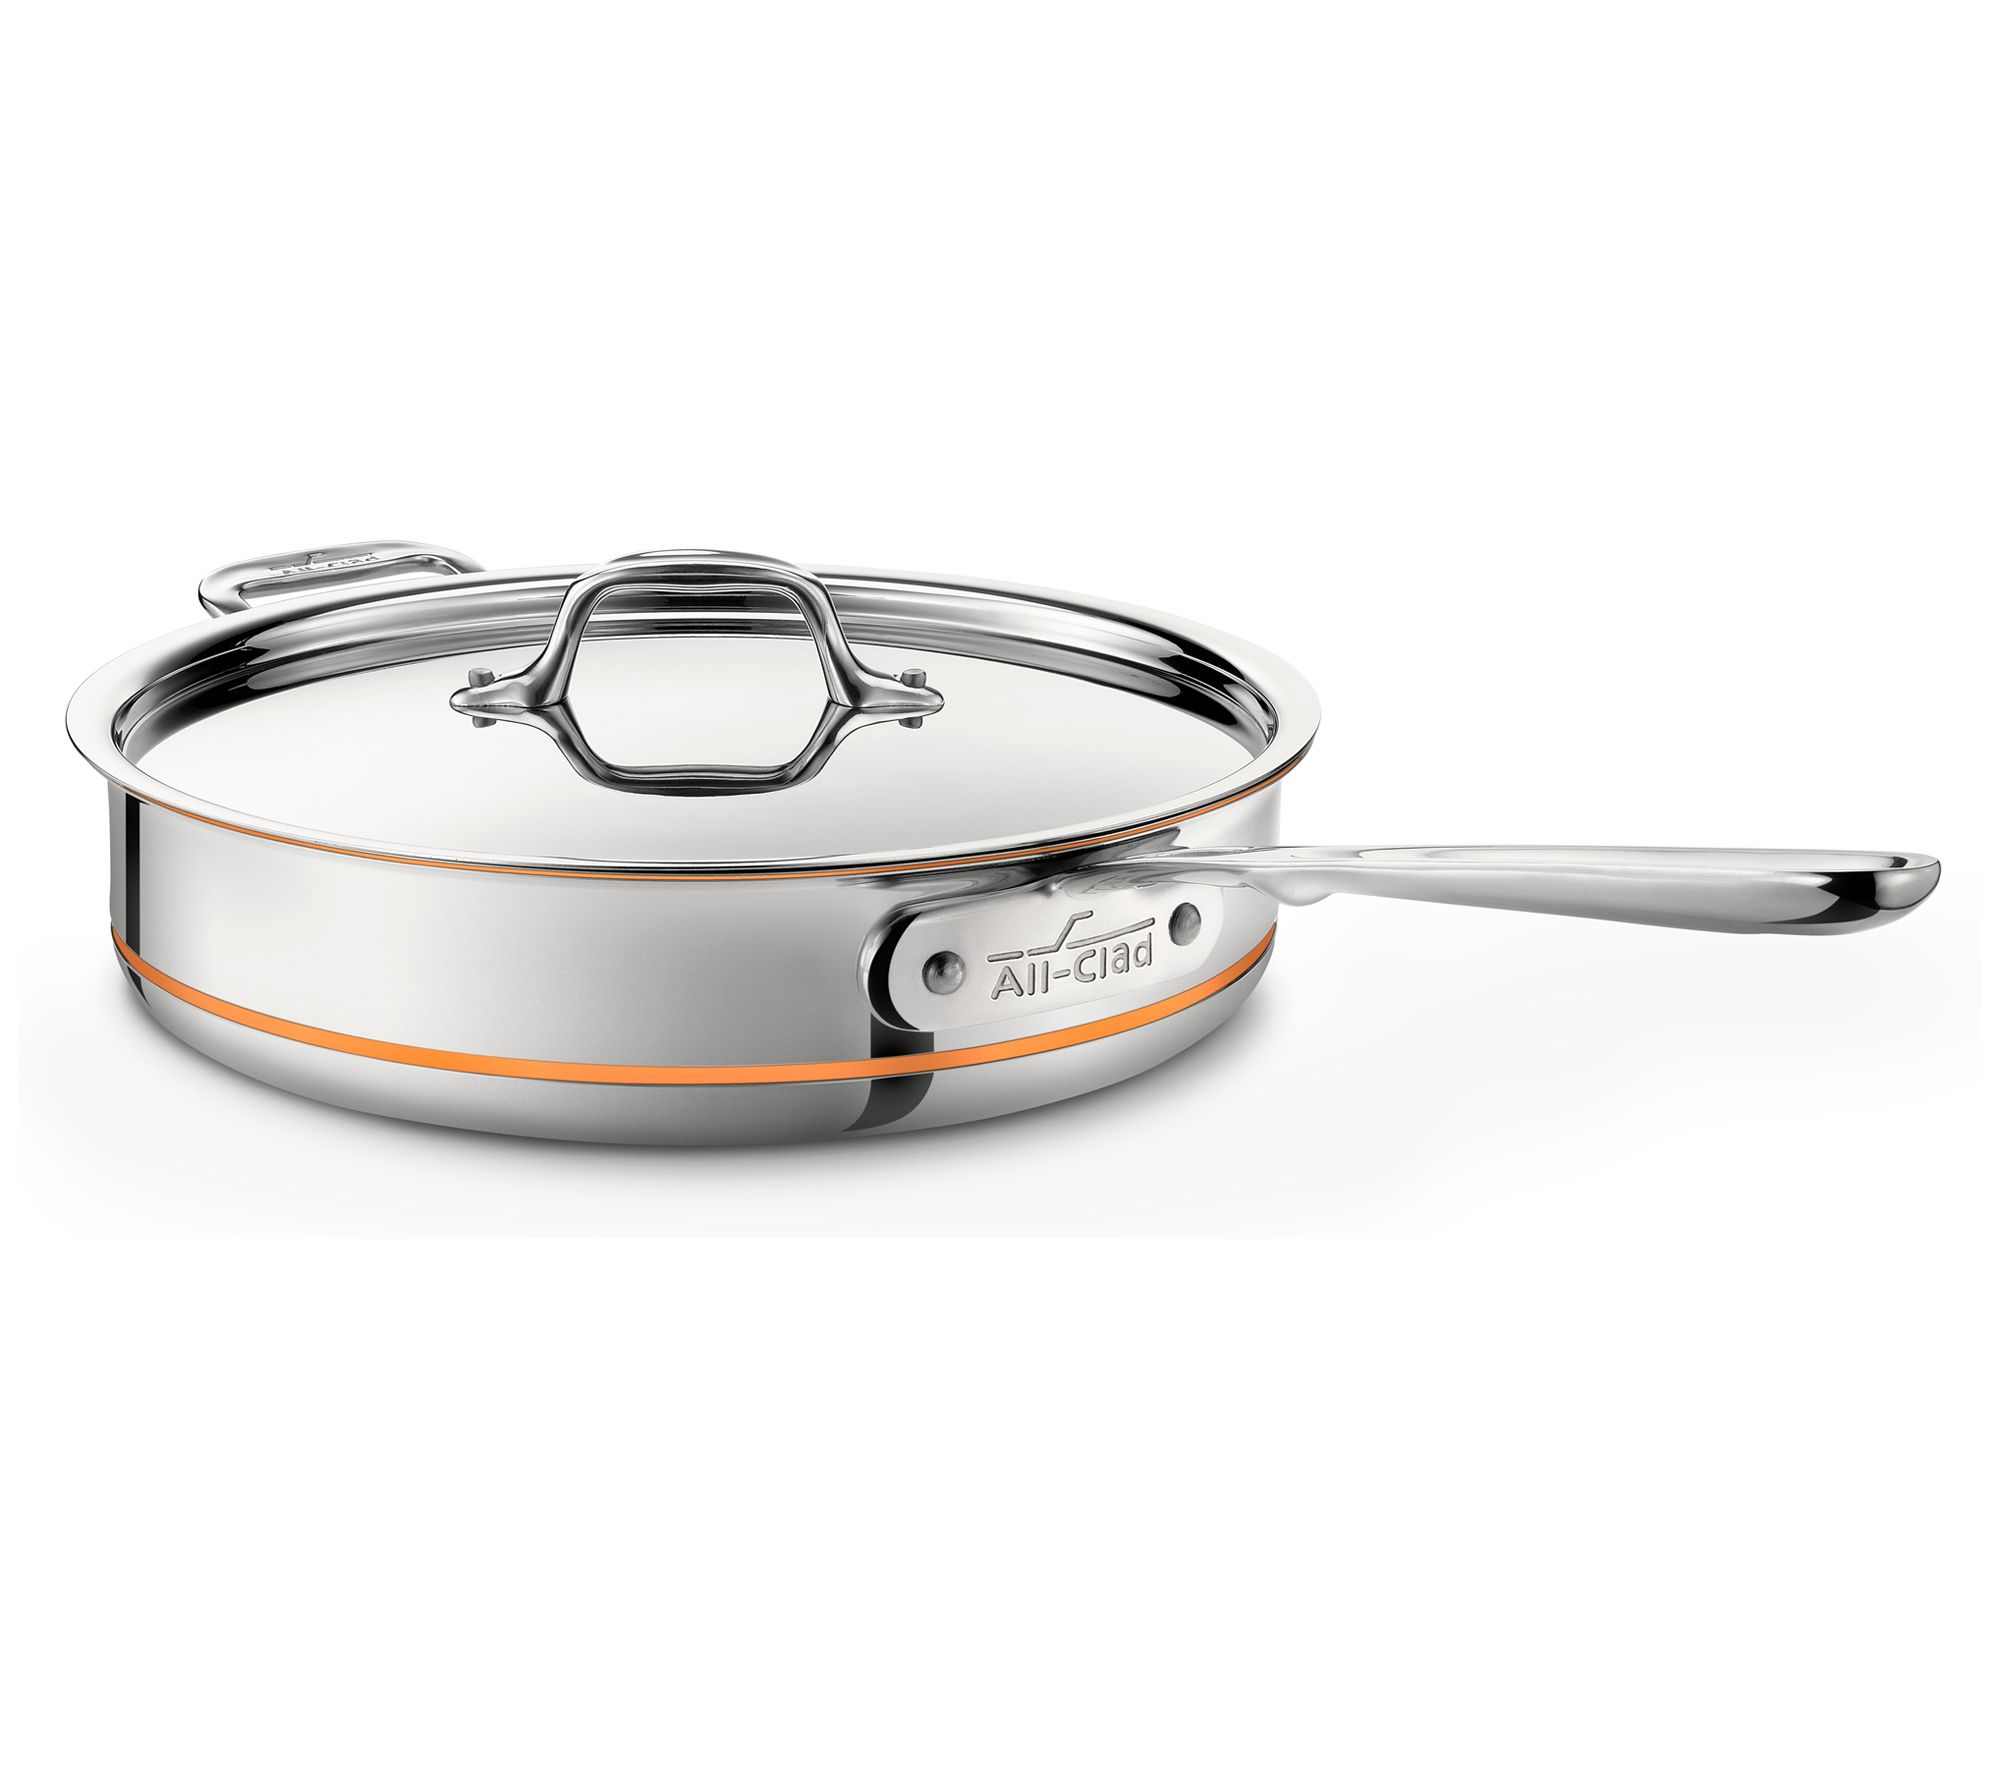 KitchenAid 3-Ply Base Brushed Stainless Steel Deep Saute Pan with Helper Handle and Lid, 4.5 Quart